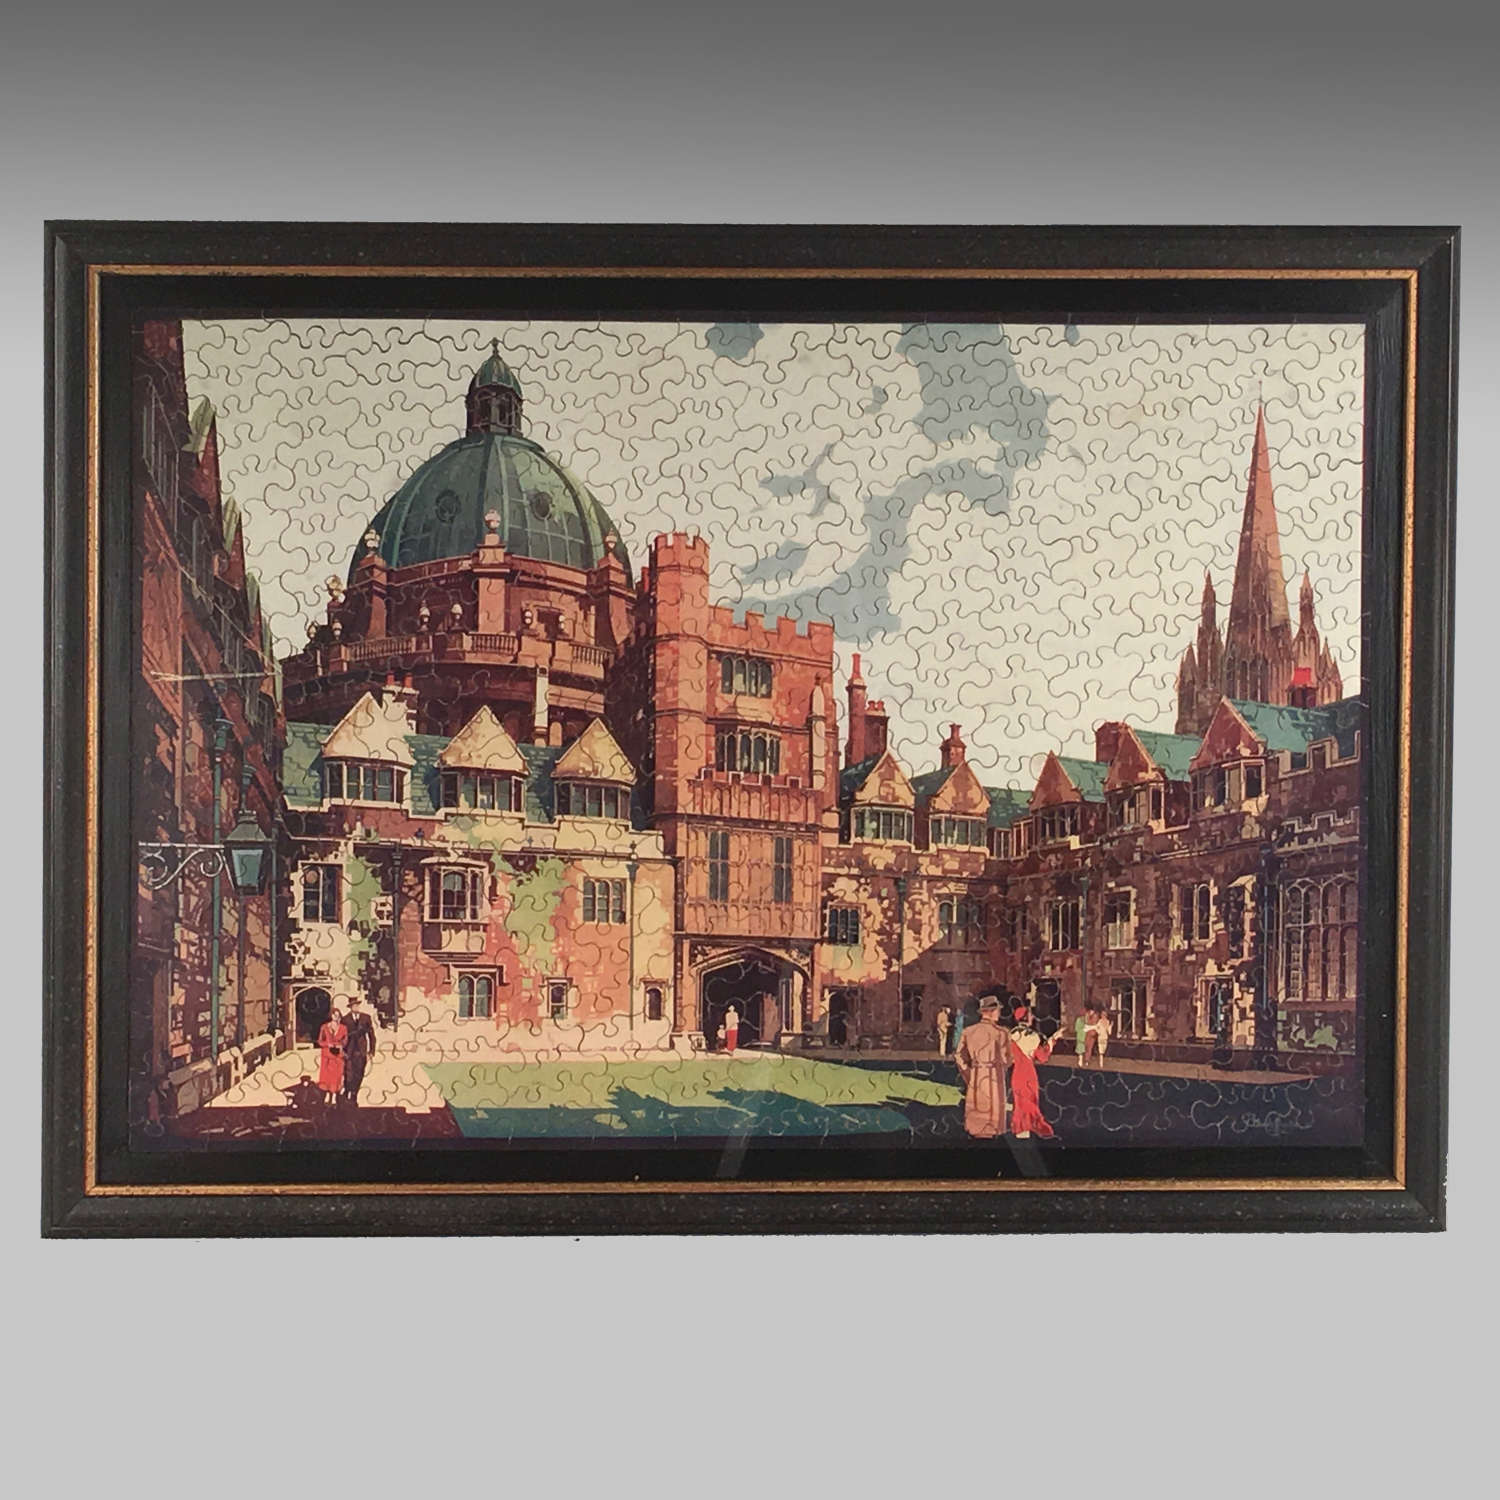 Vintage GWR jigsaw puzzle - Brasenose College, Oxford